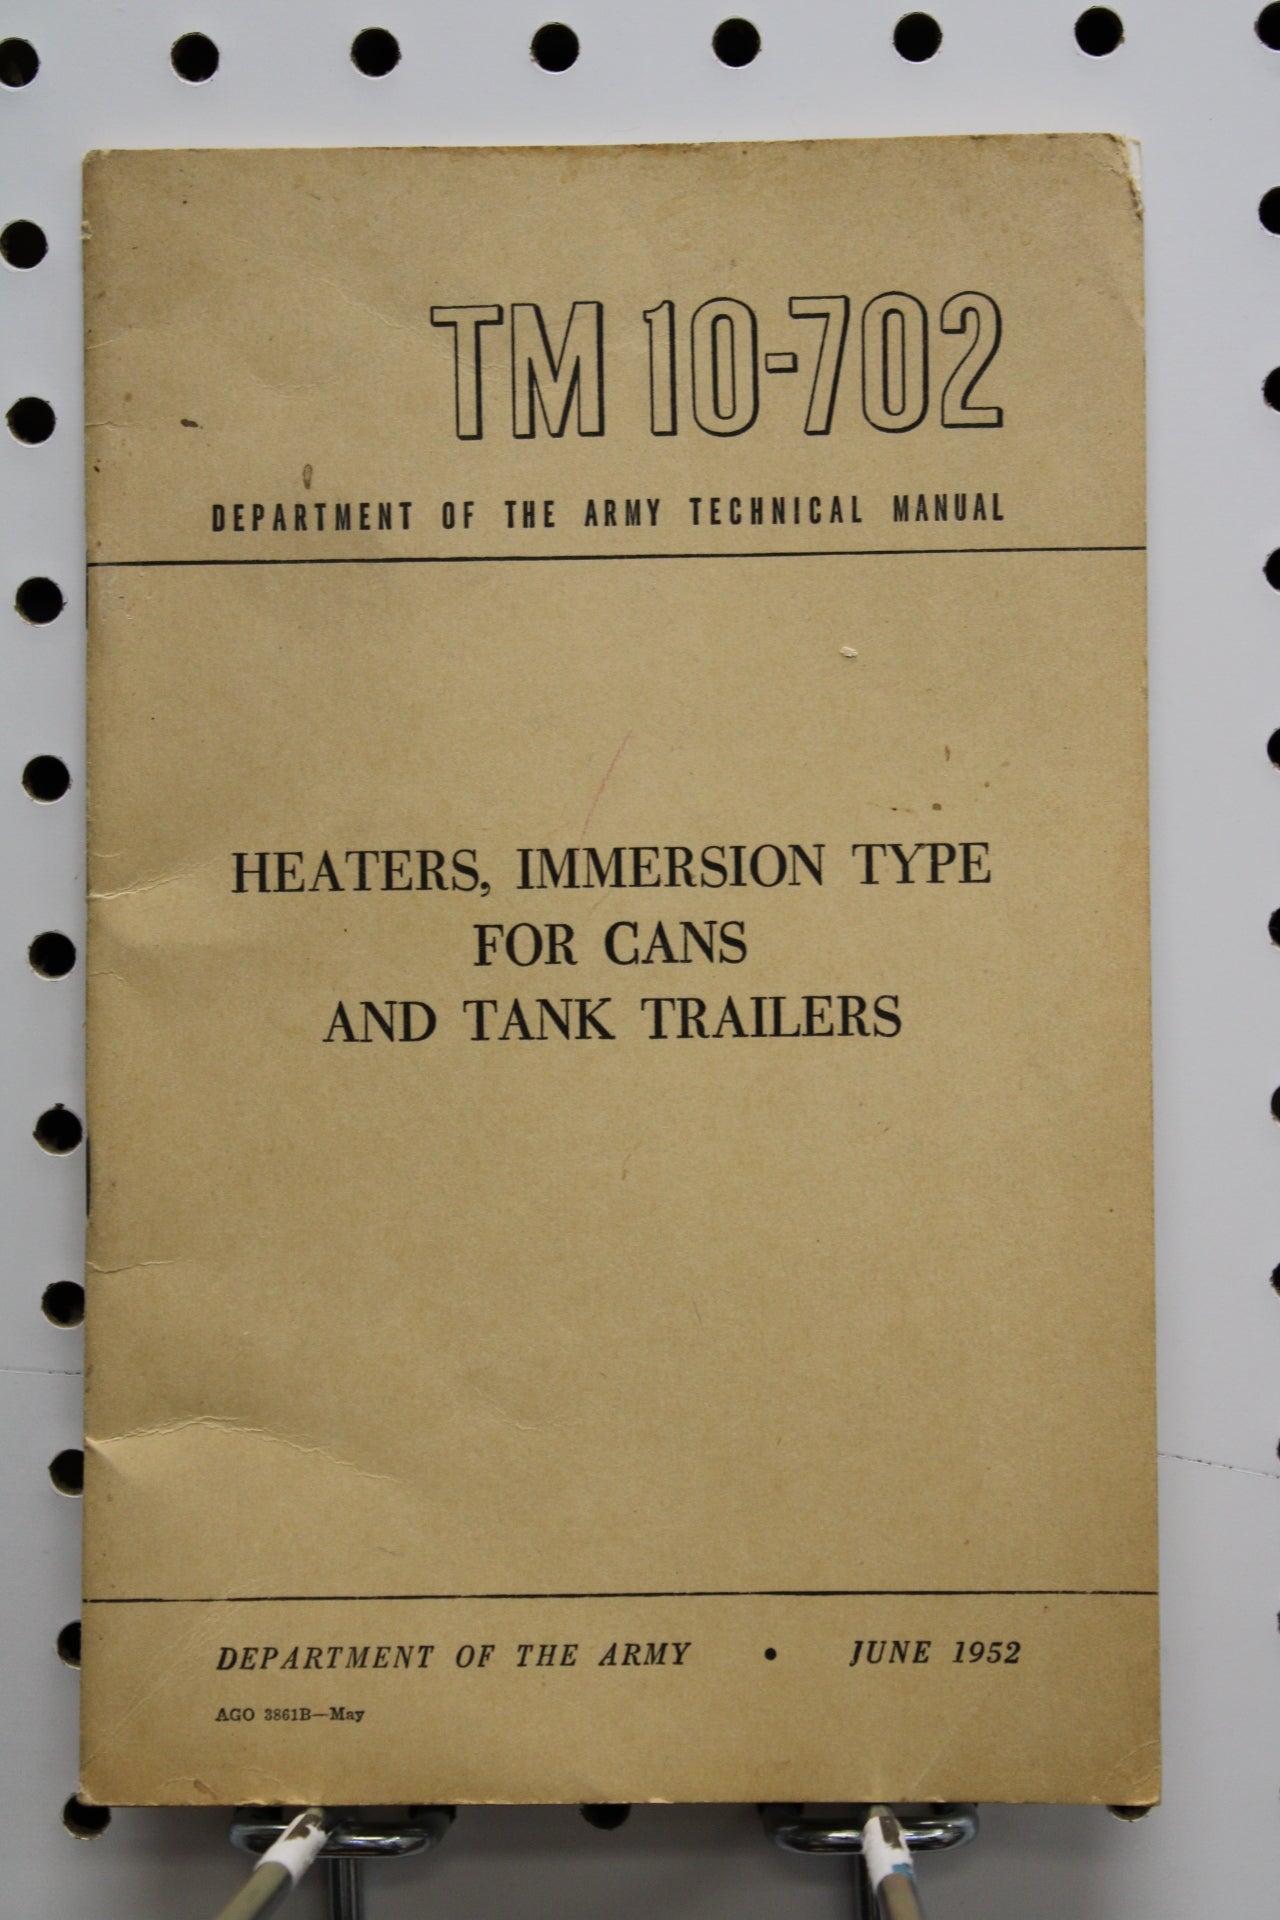 BOOK: June 1952 TM 10-702 Heaters, Immersion Type for Cans and Tank Trailers (T624)